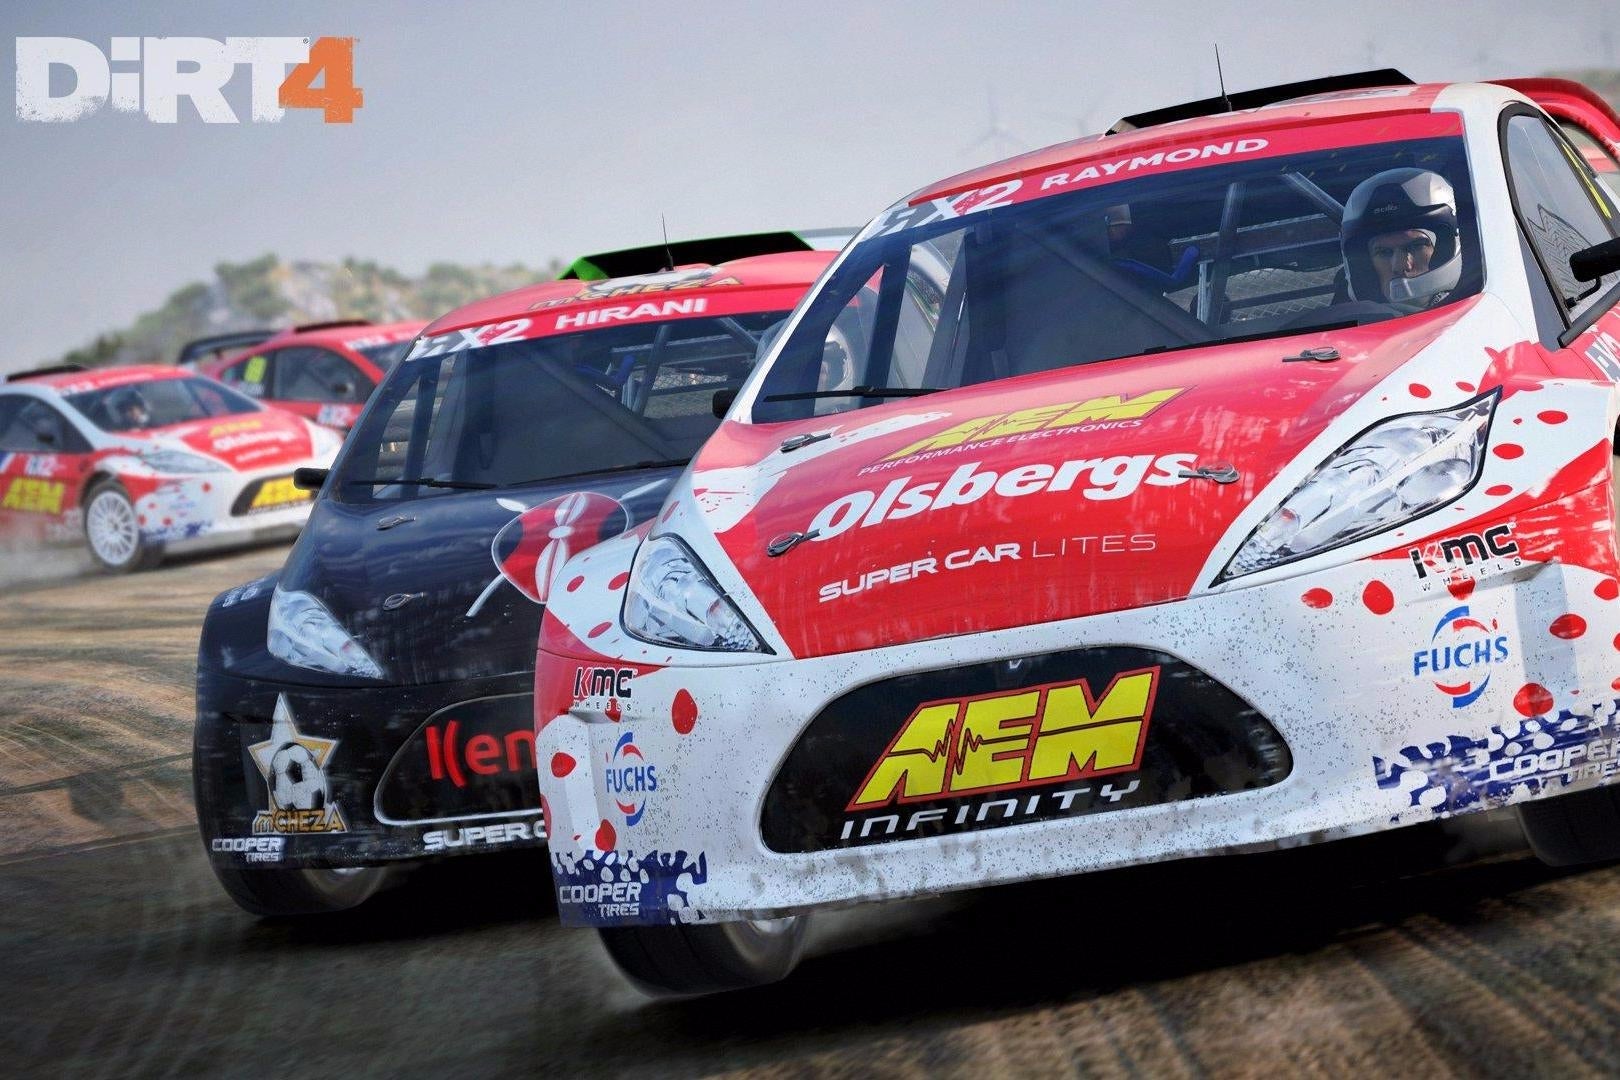 Image for Watch: Dirt 4 gameplay reveals what's new in Dirt 4